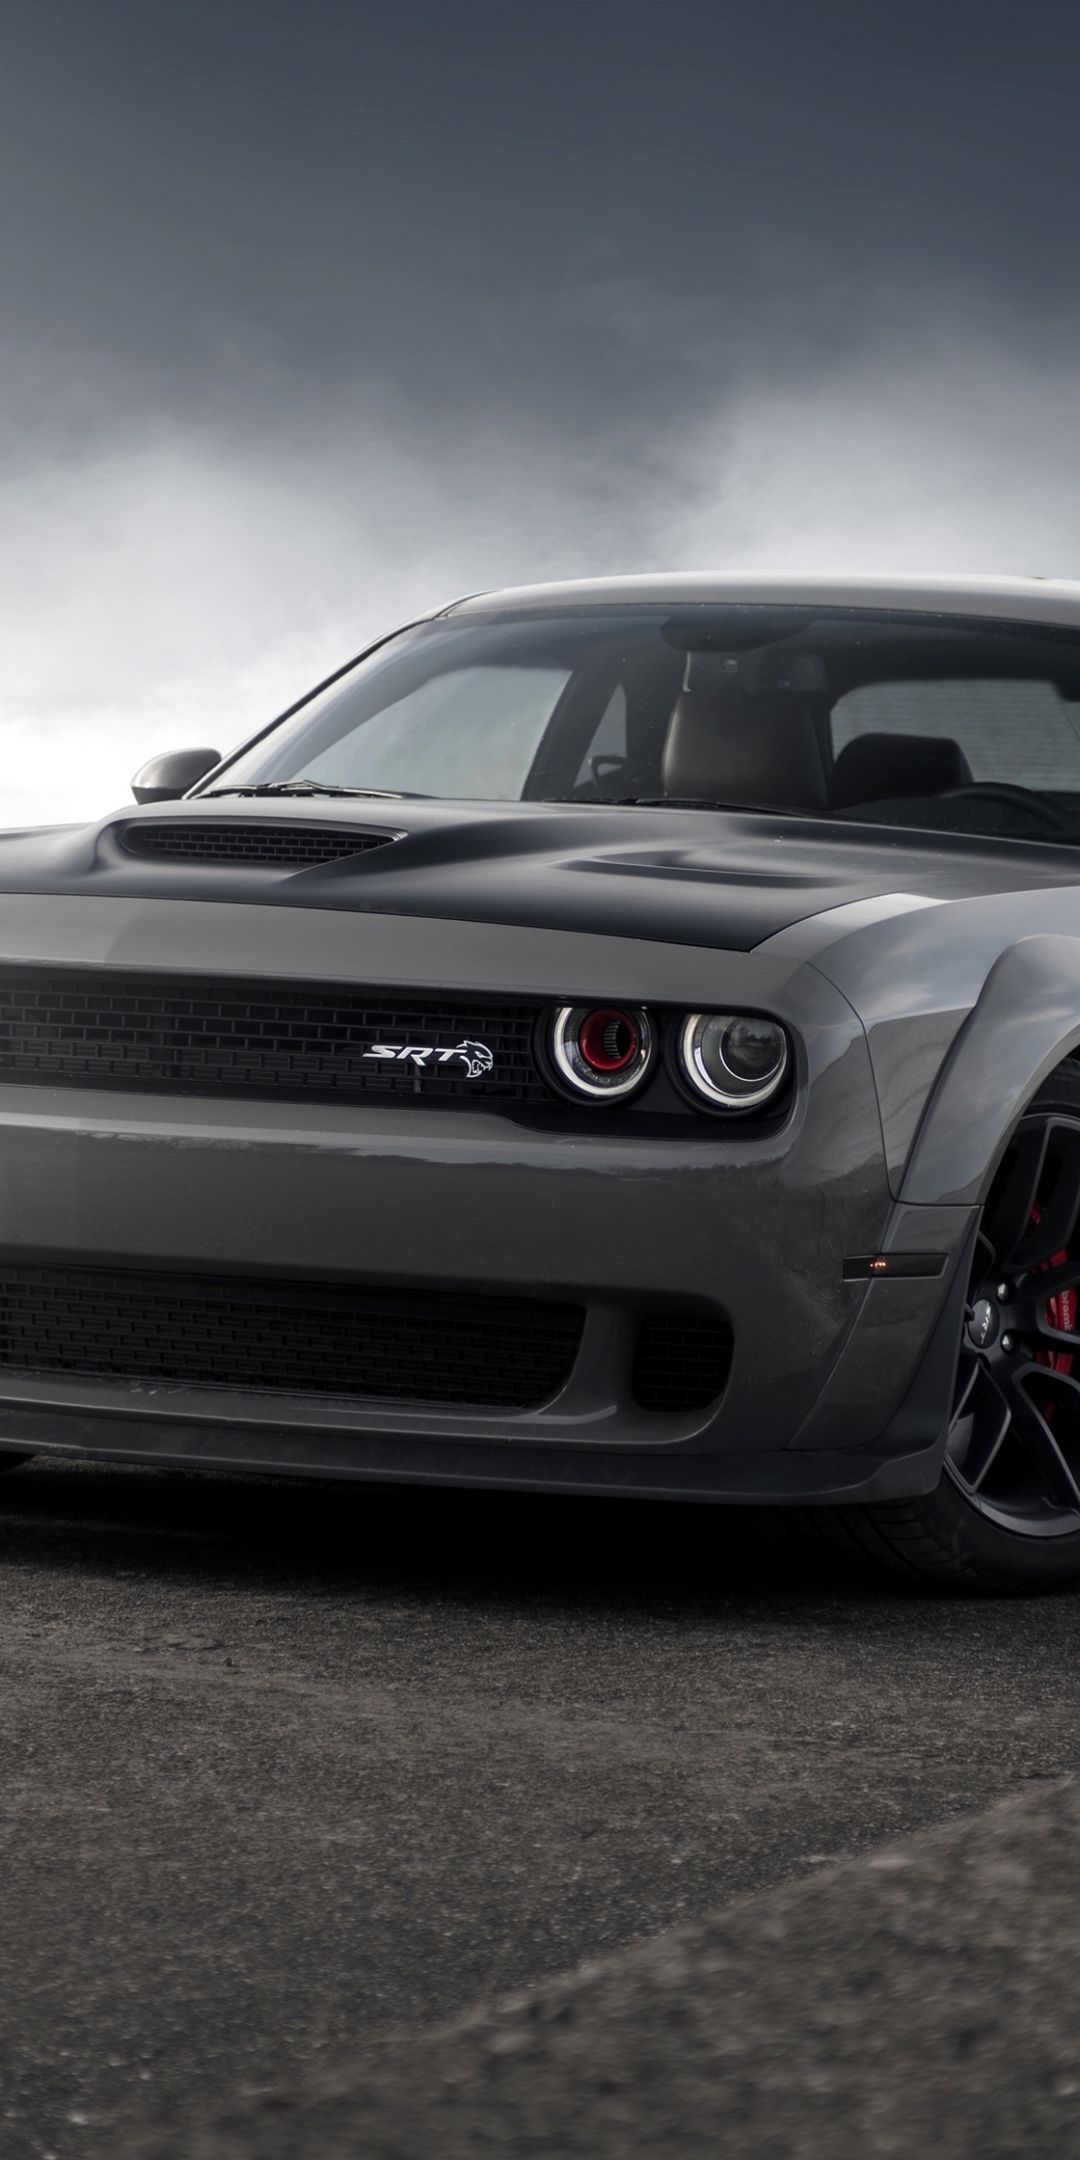 80+ Dodge Challenger SRT HD Wallpapers and Backgrounds